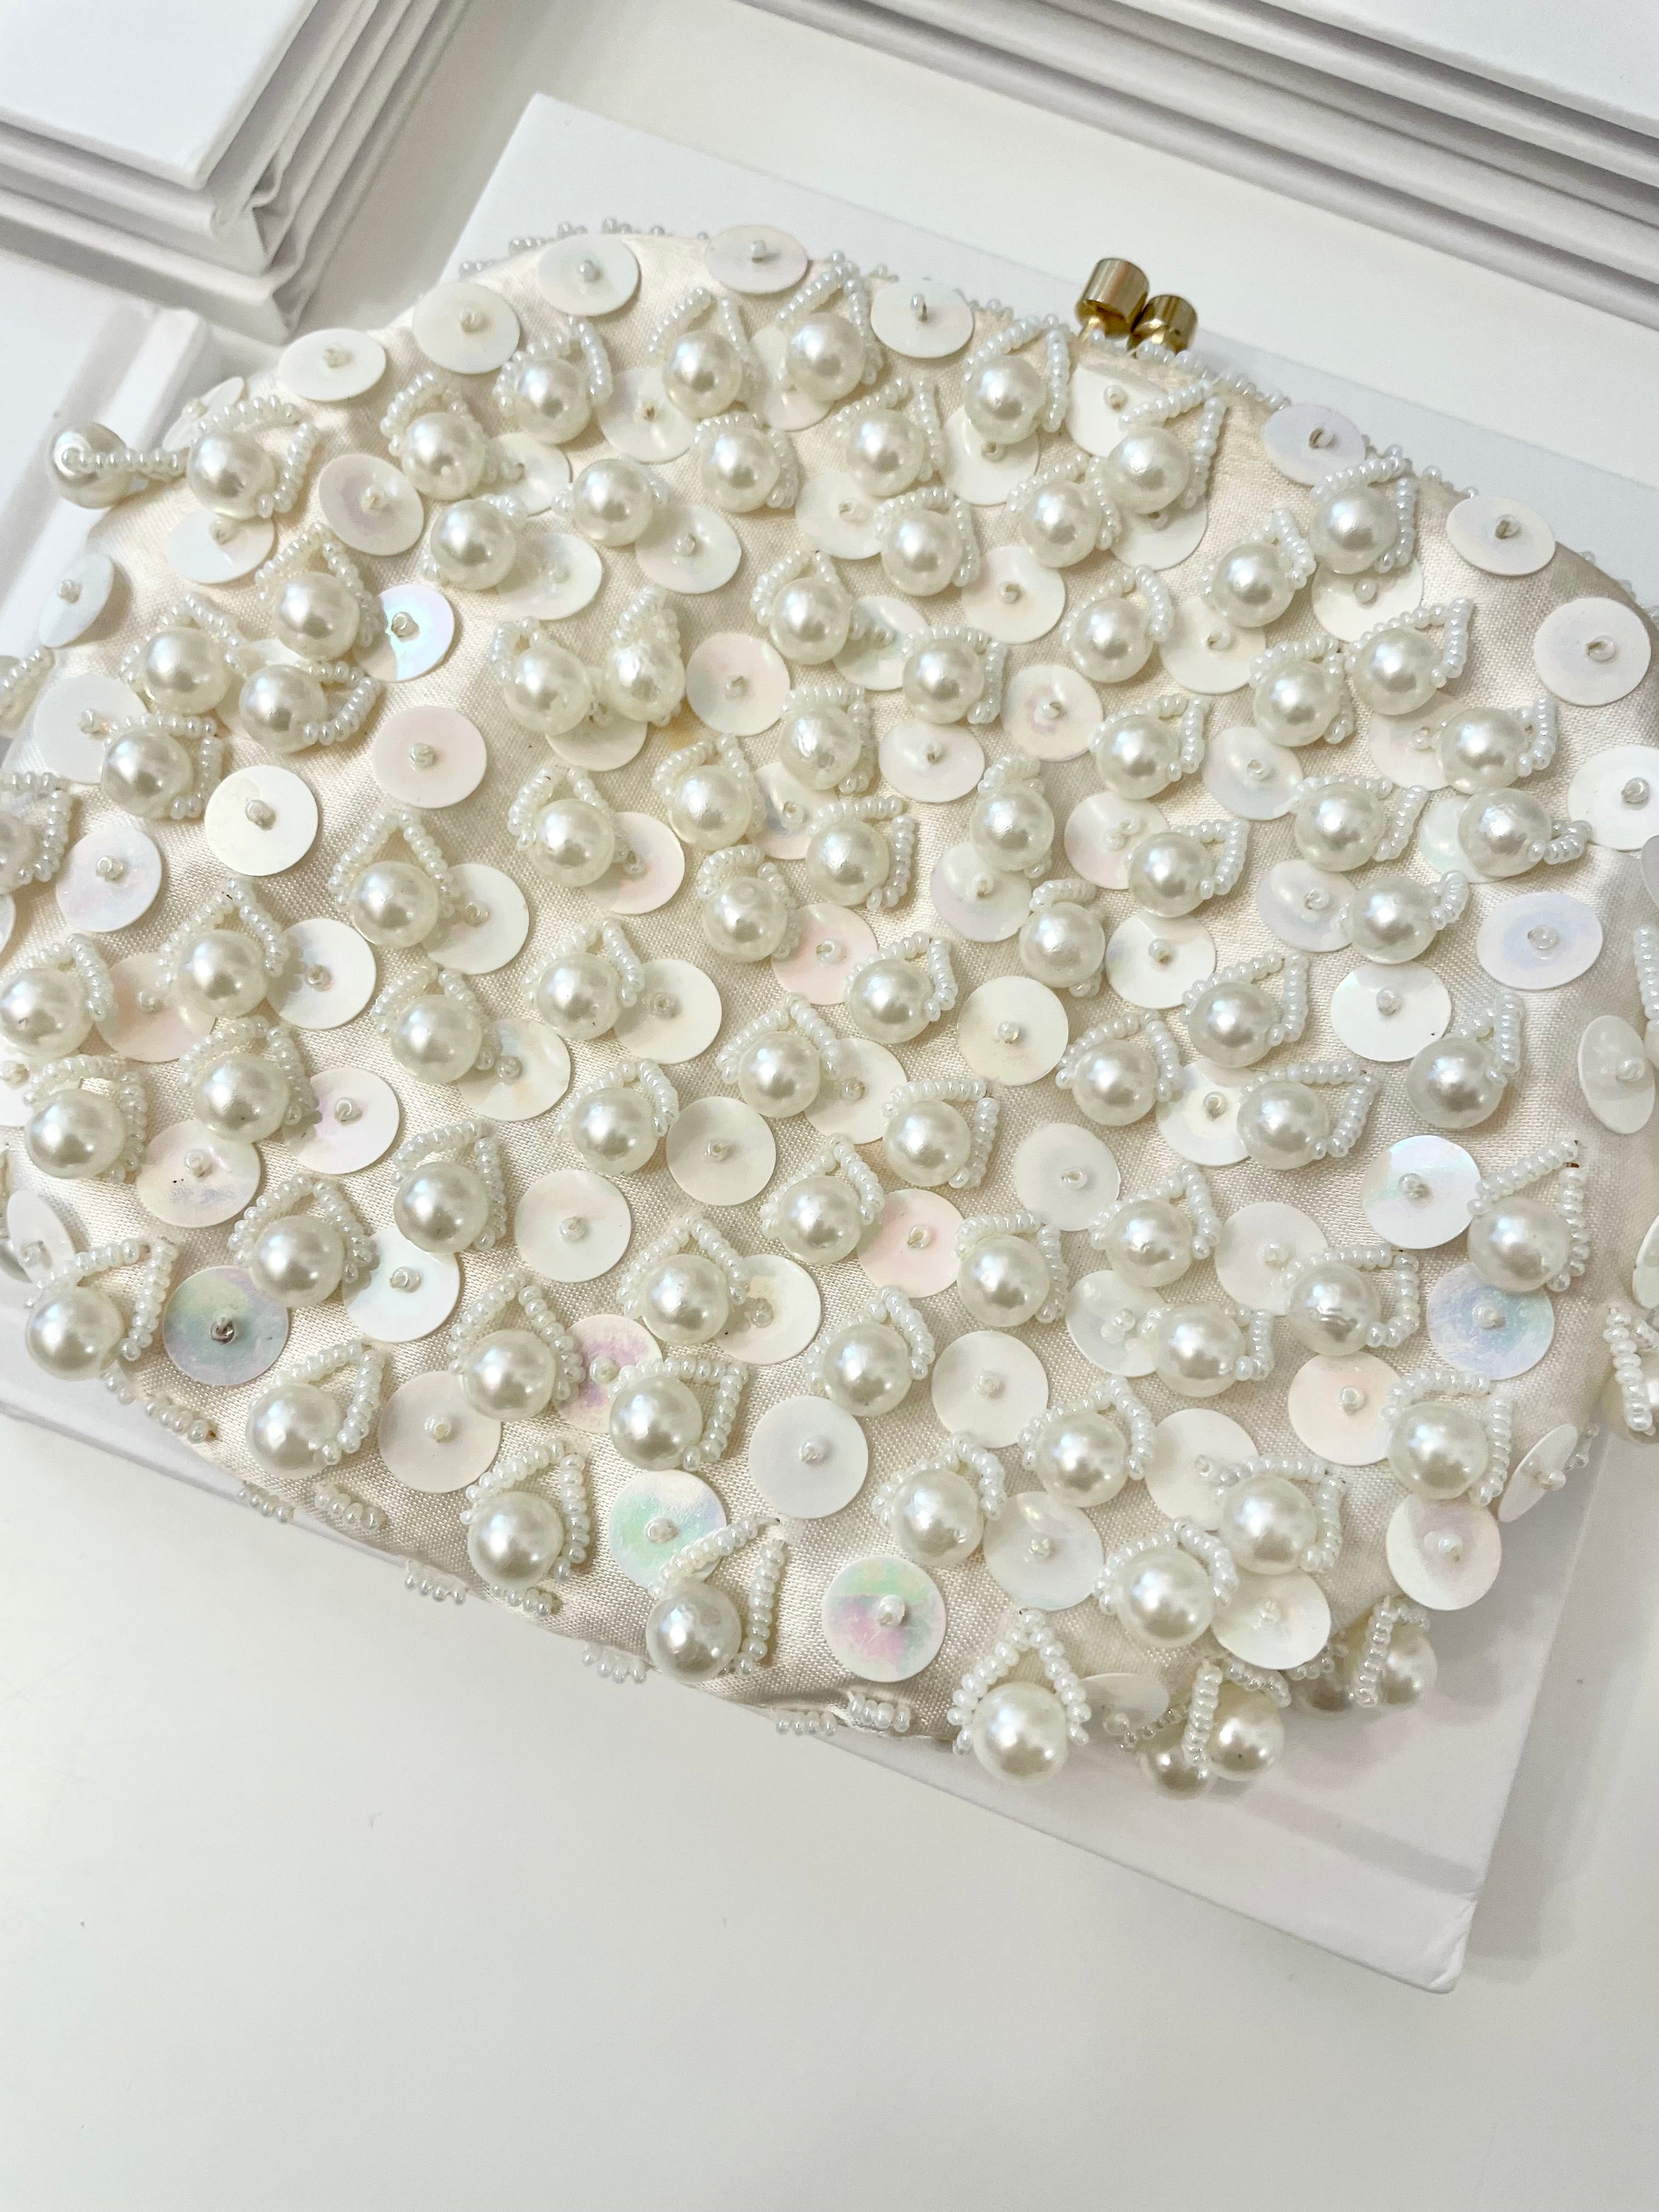 This 1960's classy pearl cha cha evening bag... is a must for any lady!